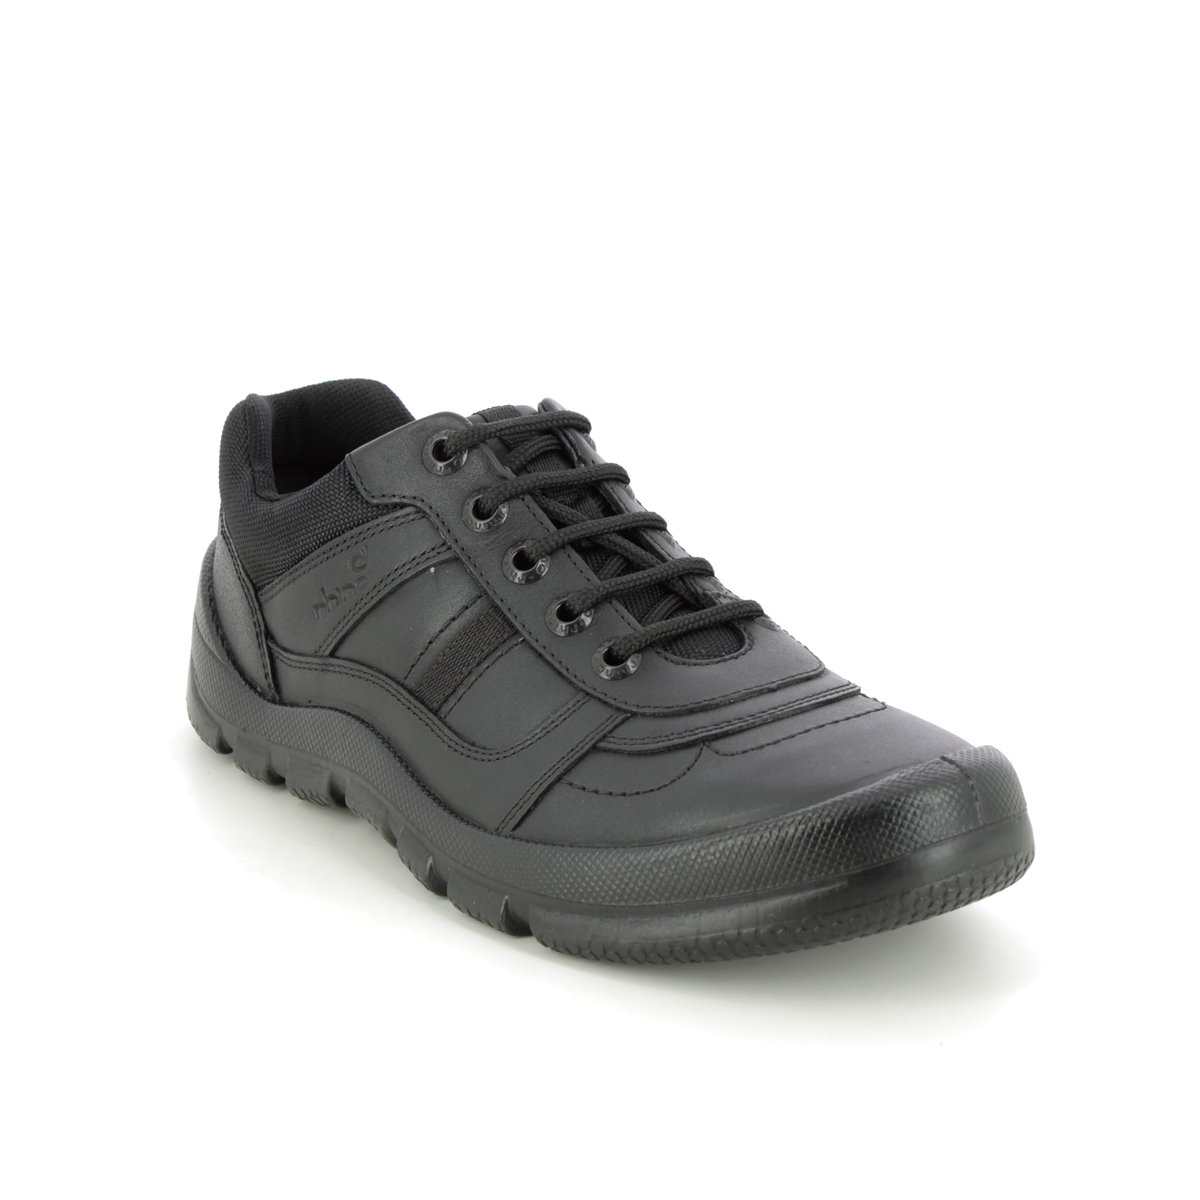 Start Rite Rhino Warrior Lace Black leather Kids Boys Shoes 8238-76F in a Plain Leather in Size 5.5